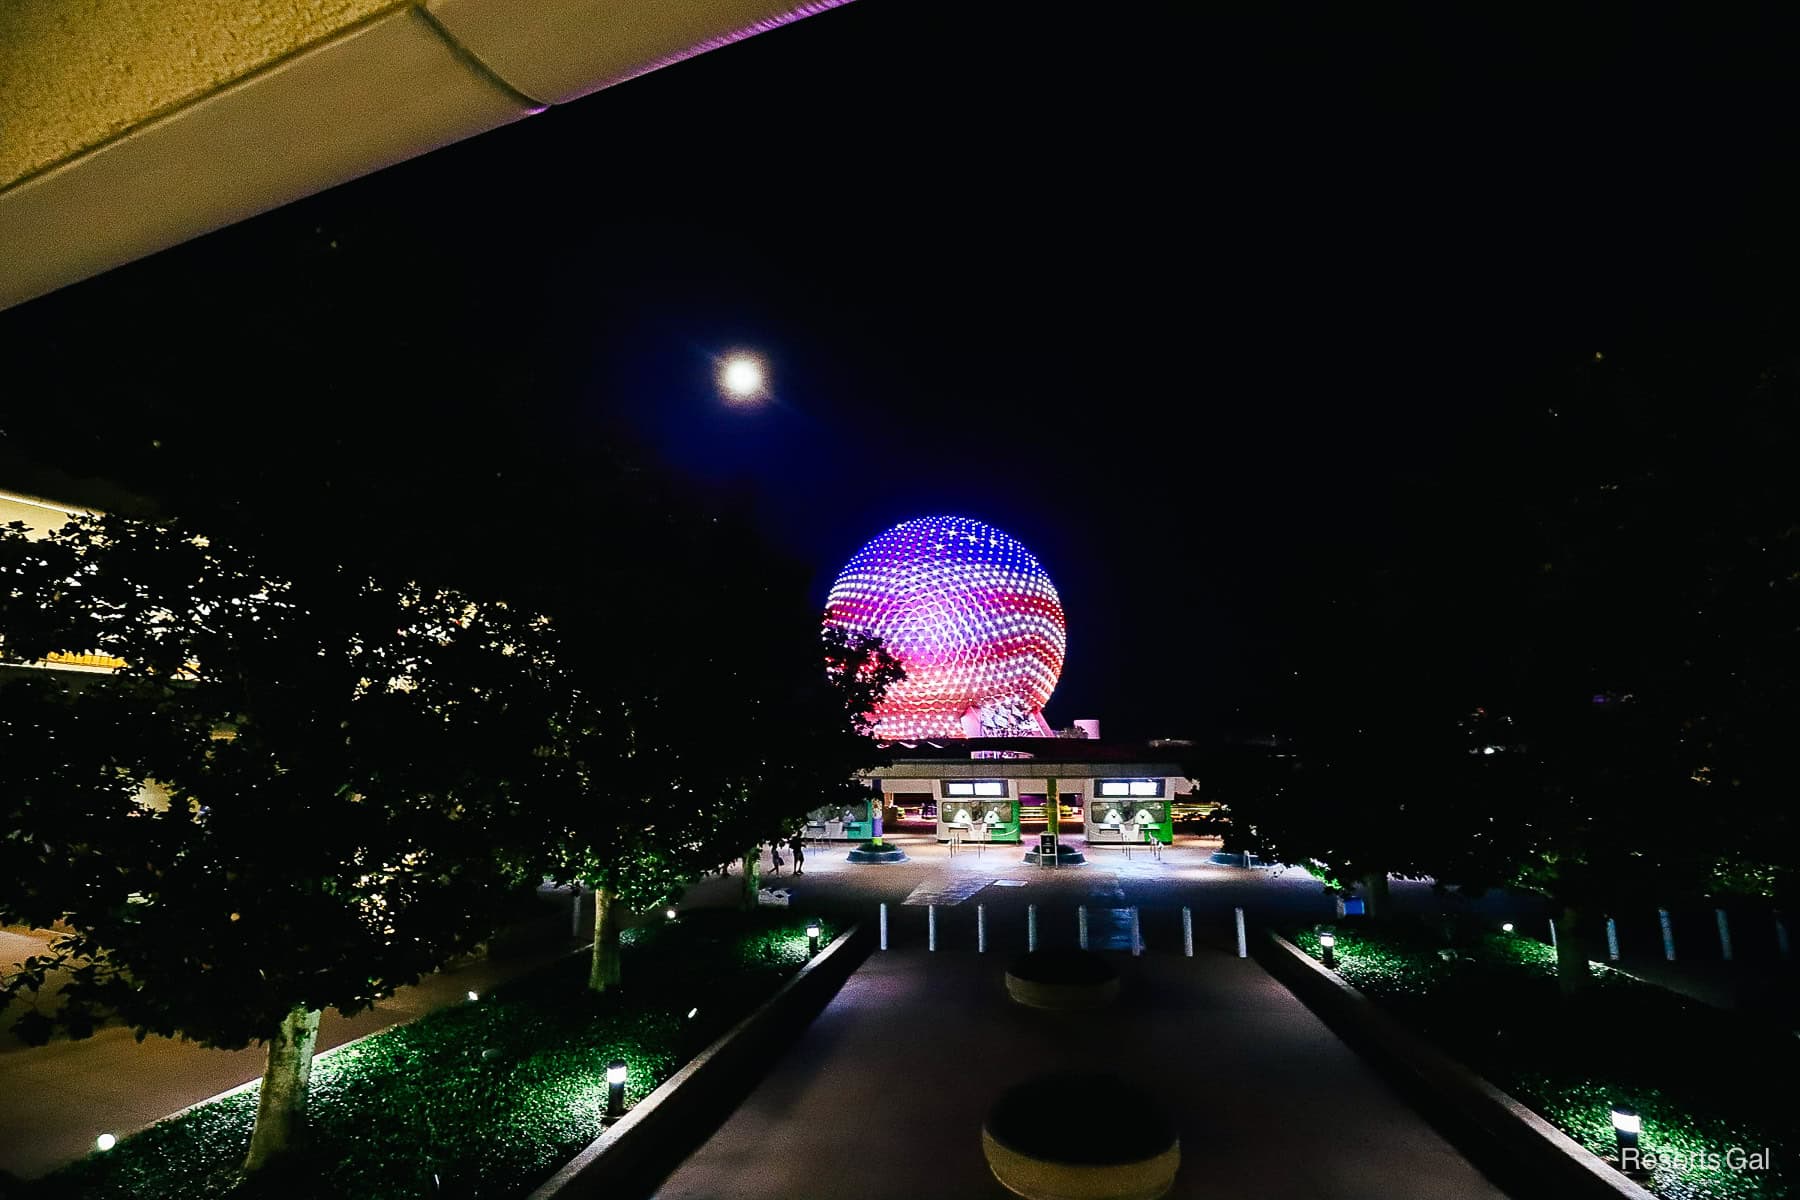 Spaceship Earth as seen from the monorail platform with red, white, and blue projection maps. 